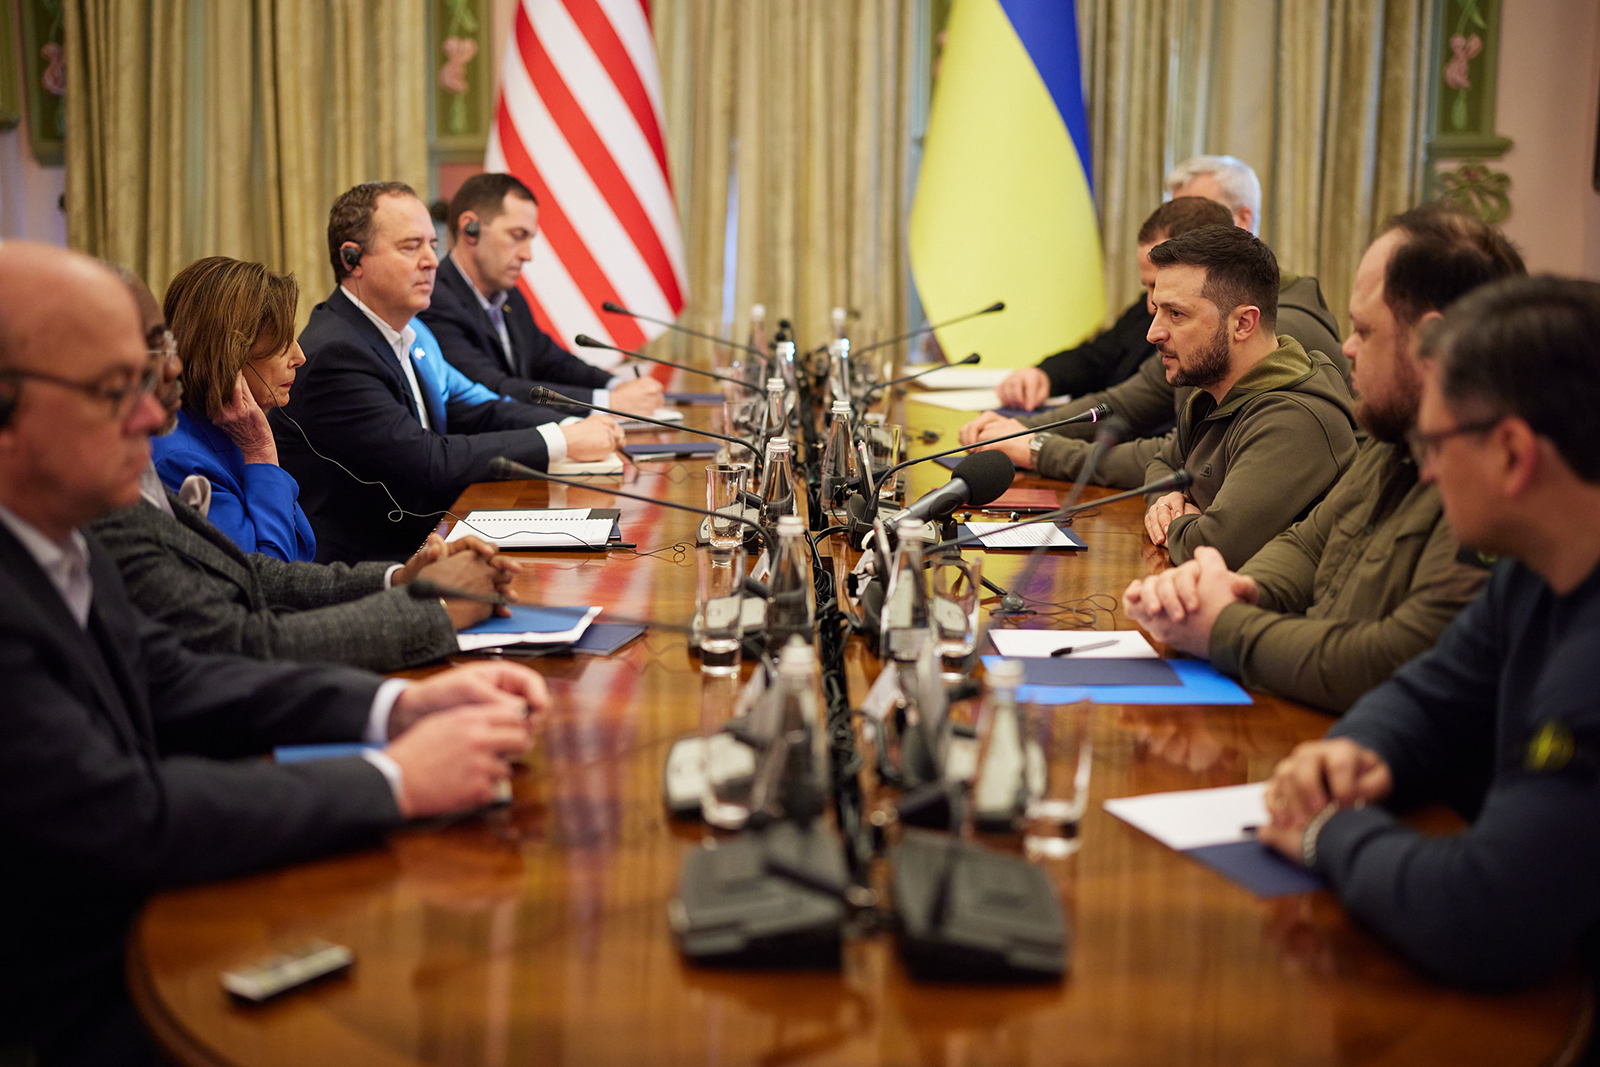 Ukrainian President Volodymyr Zelensky meets with US Speaker of the House Nancy Pelosi, Rep. Jim McGovern, Rep. Gregory Meeks and Rep. Adam Schiff during a visit on April 30, in Kyiv, Ukraine.